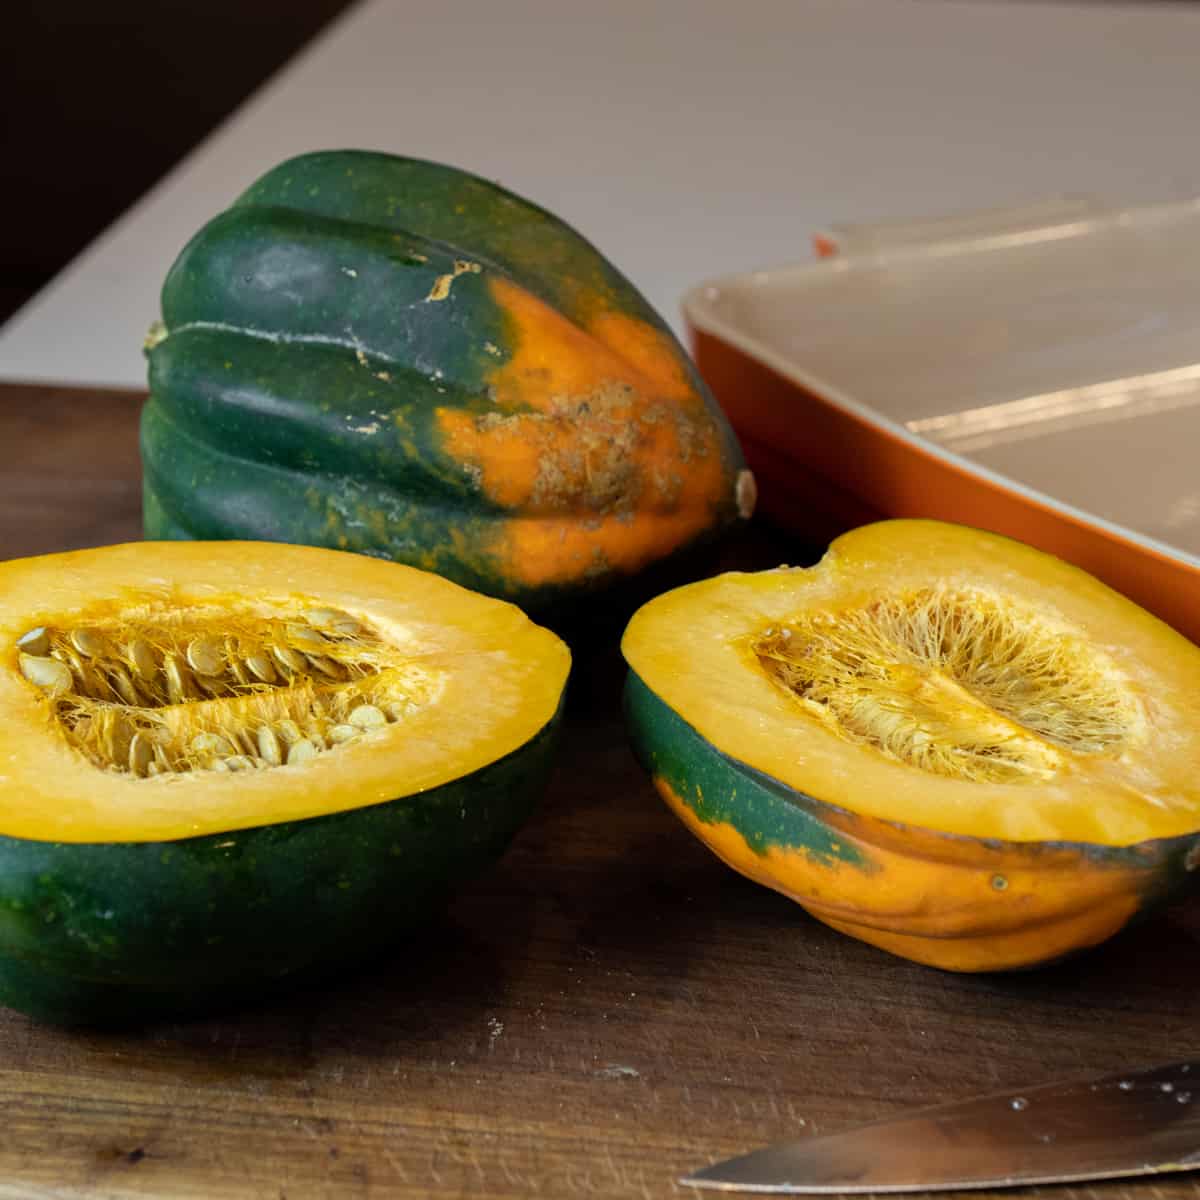 Acorn squash cut in half next to a whole one.